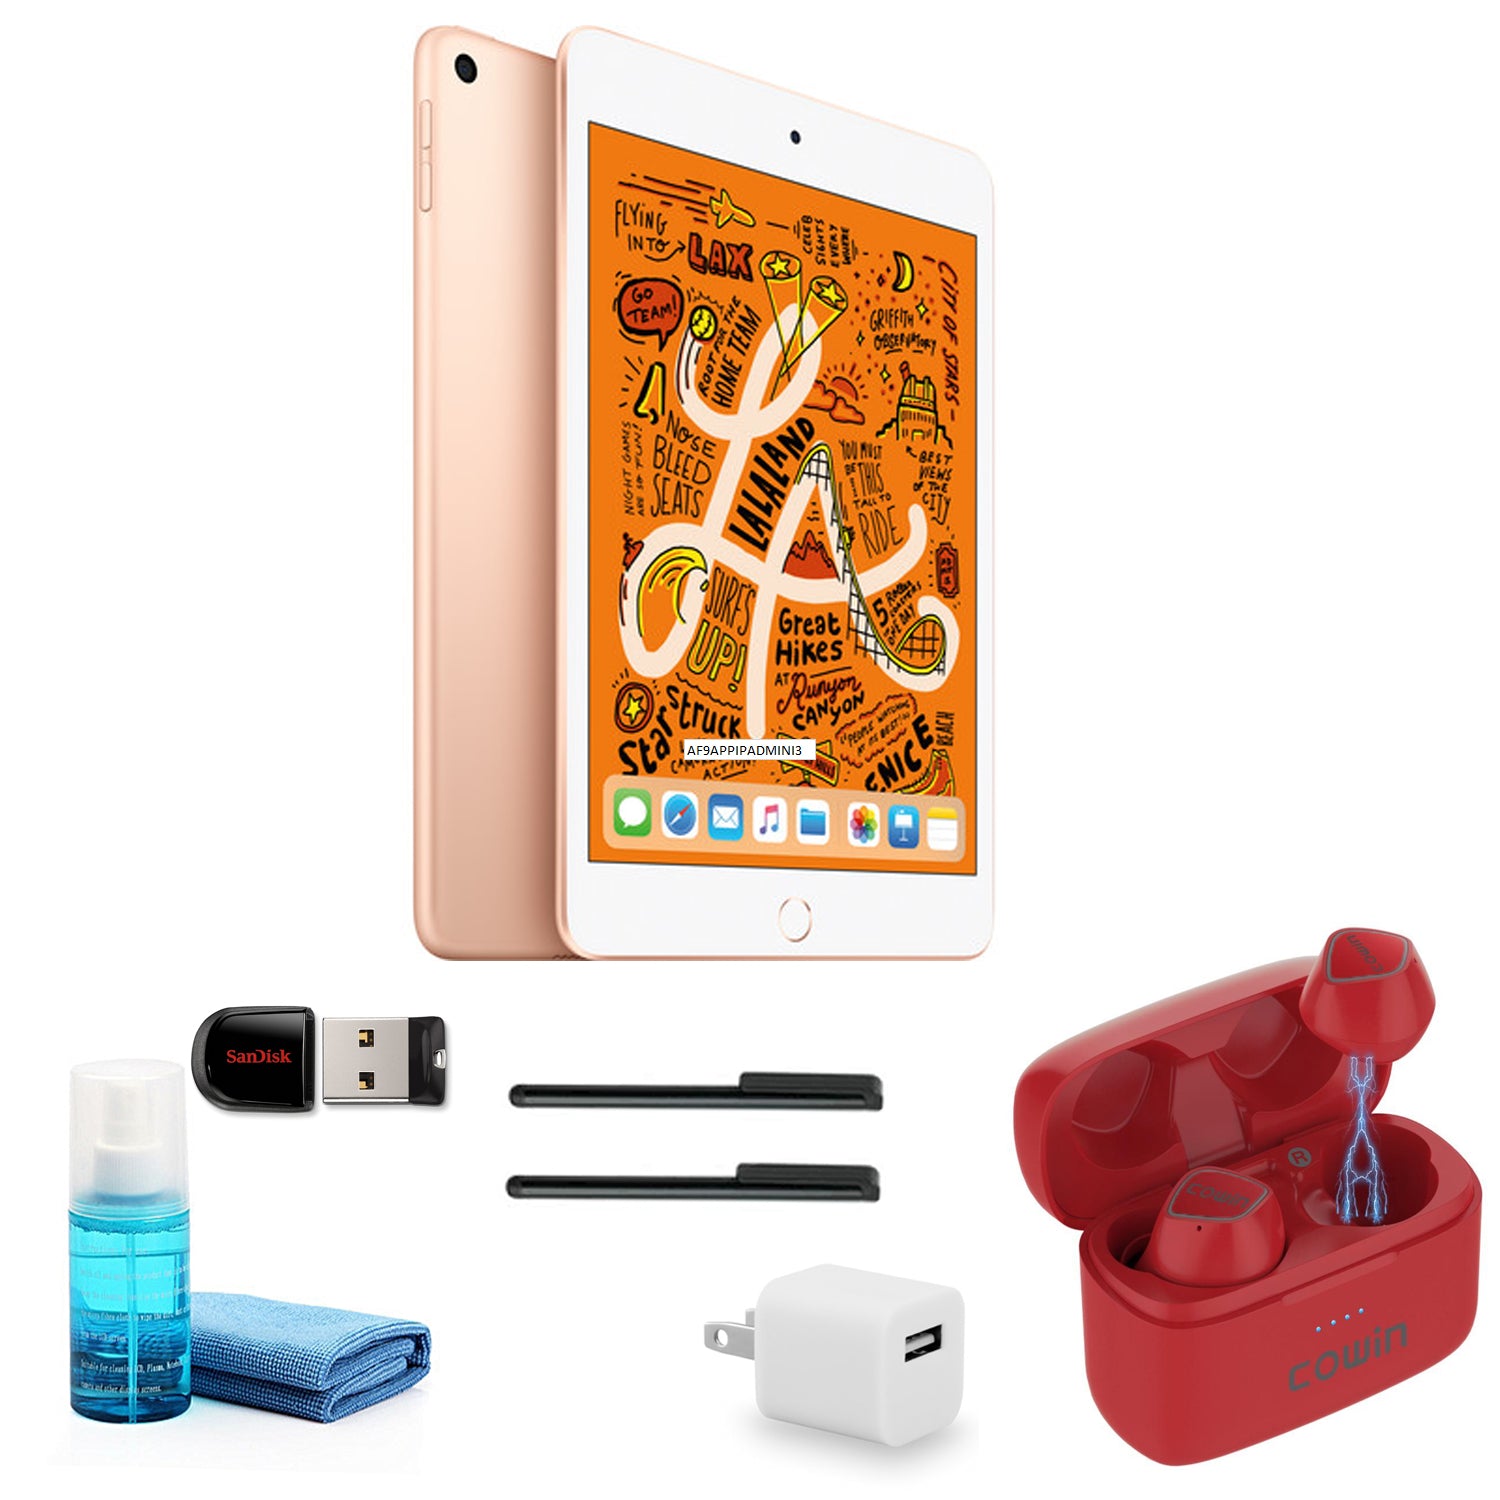 Apple iPad mini 7.9 Inch (64GB, Gold) with Red Wireless Earbuds